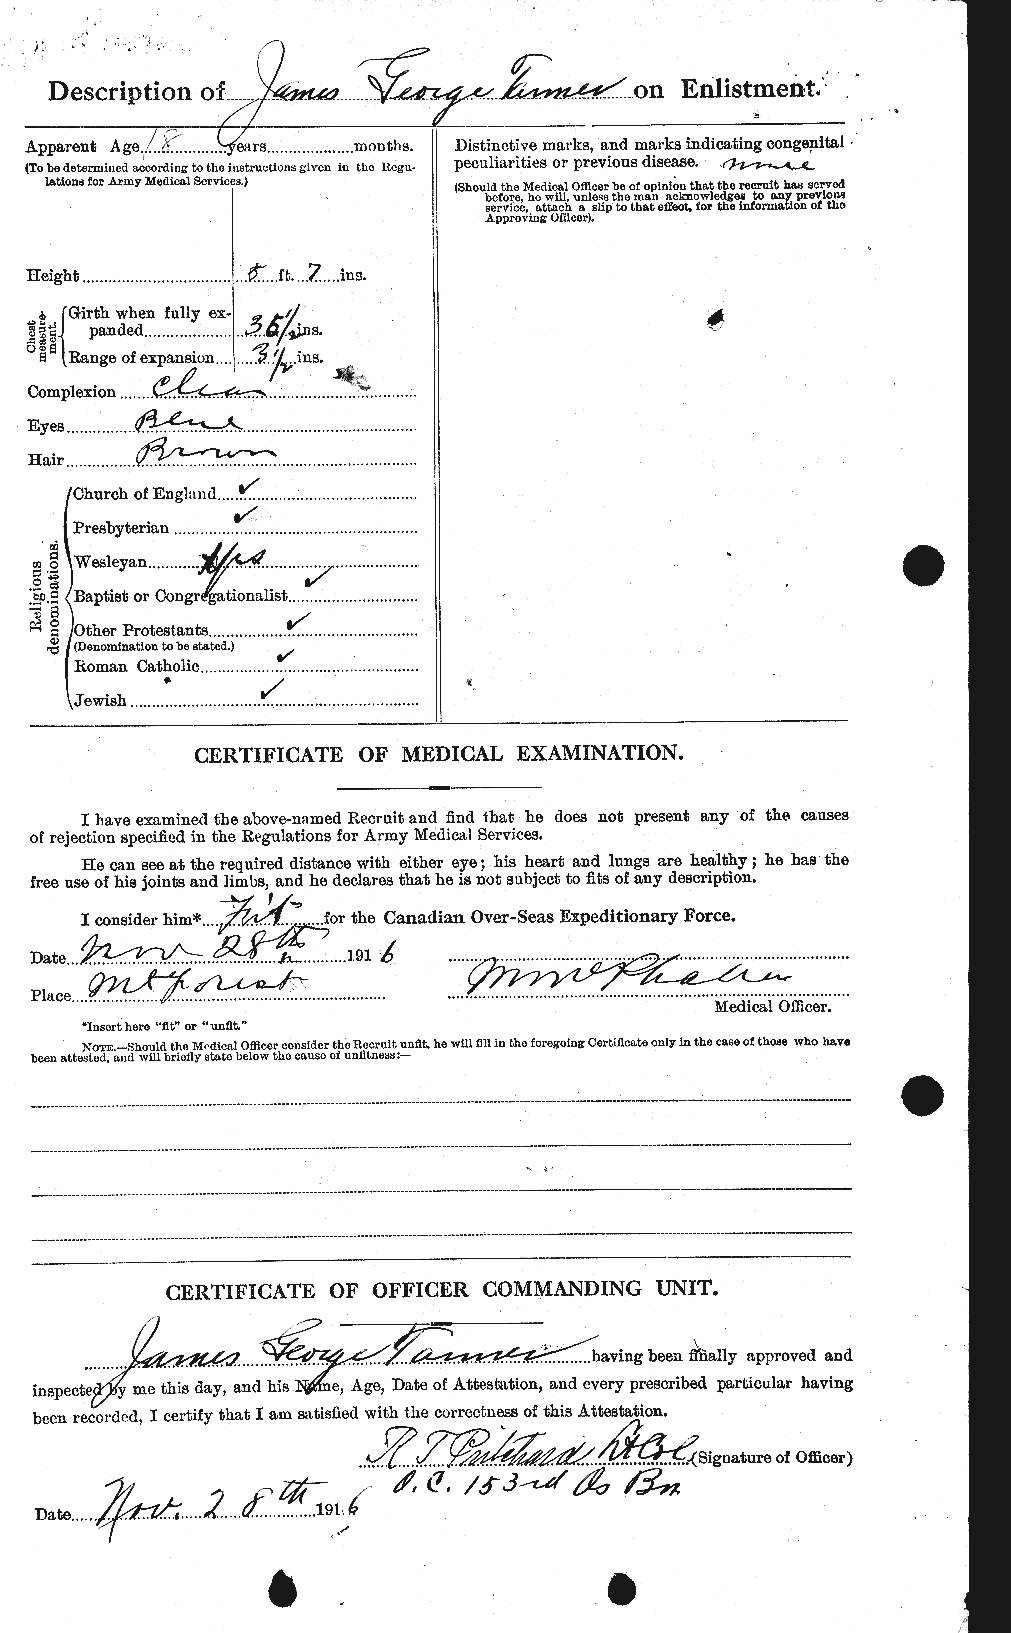 Personnel Records of the First World War - CEF 128307b